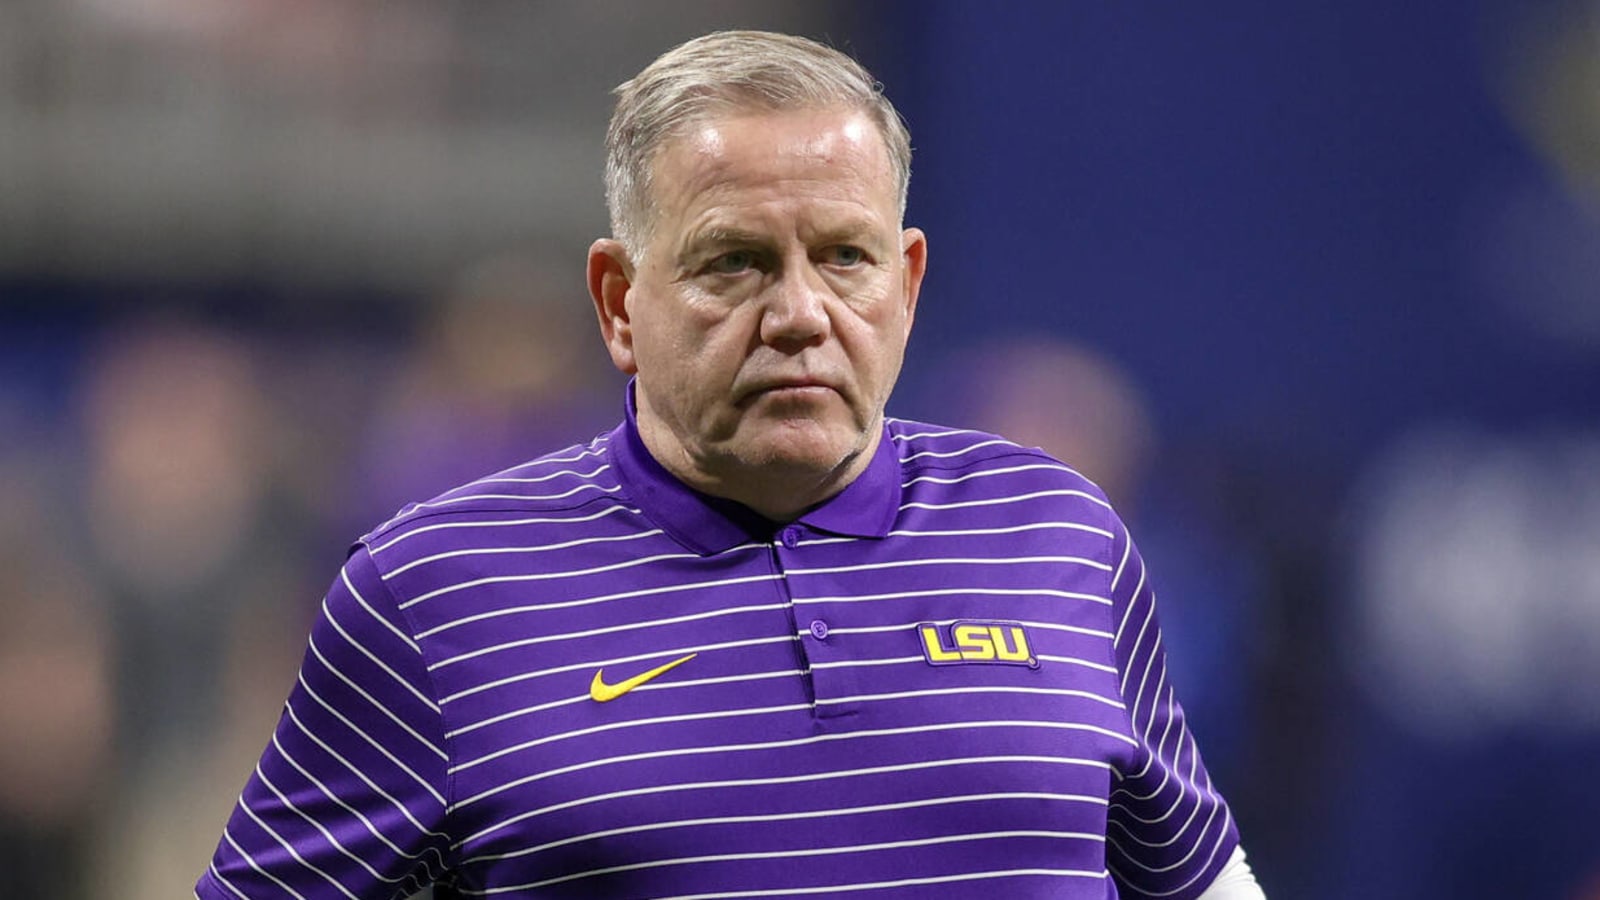 Brian Kelly answers when he thinks LSU will contend for a championship